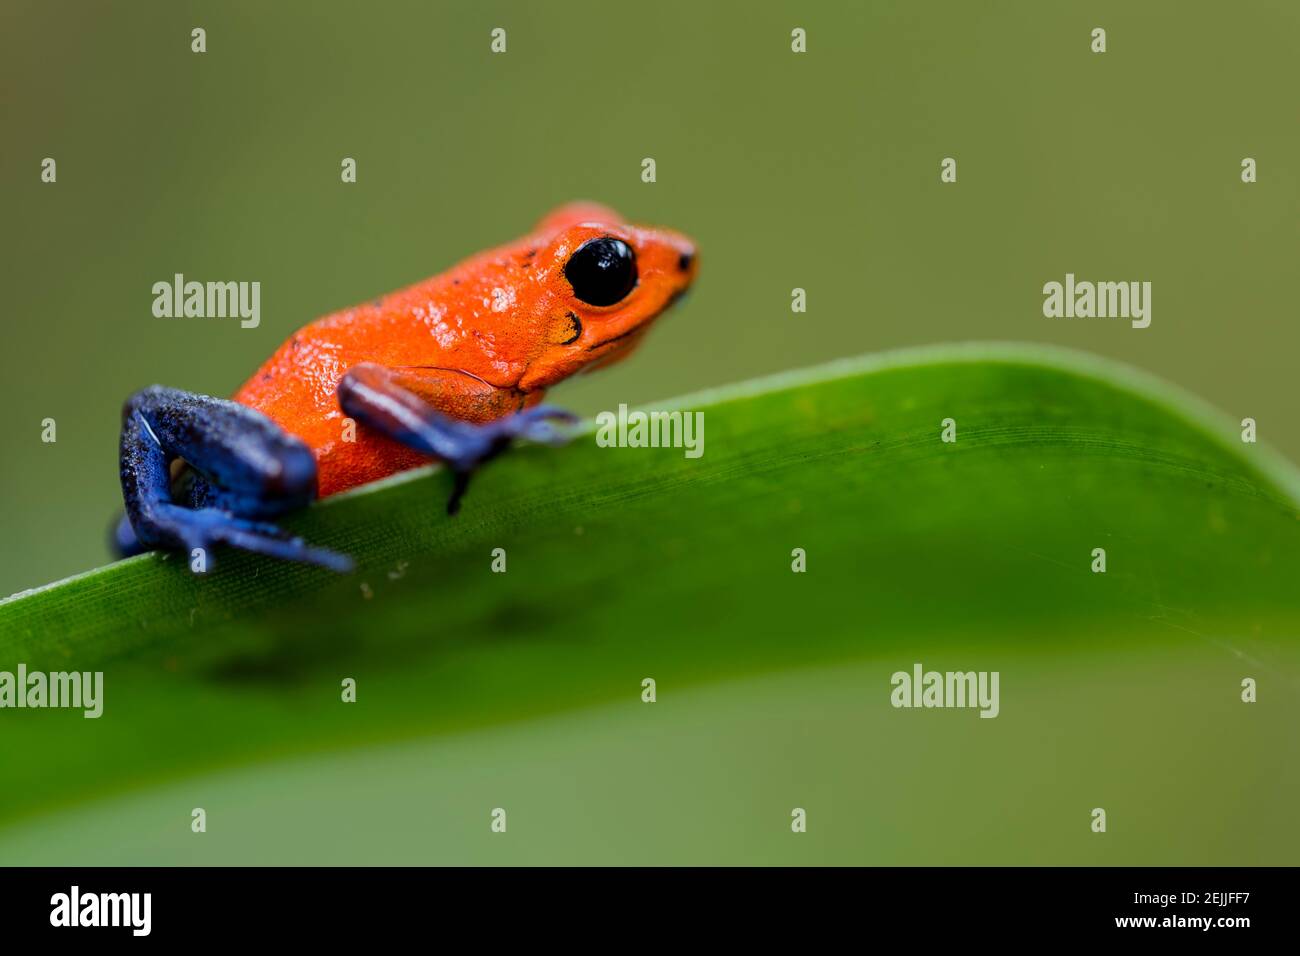 Tiny Strawberry Poison-dart Frog (Oophaga Pumilio) with black eye, red and blue skin with black spots. Ready to jump from a green in the rainforest Stock Photo